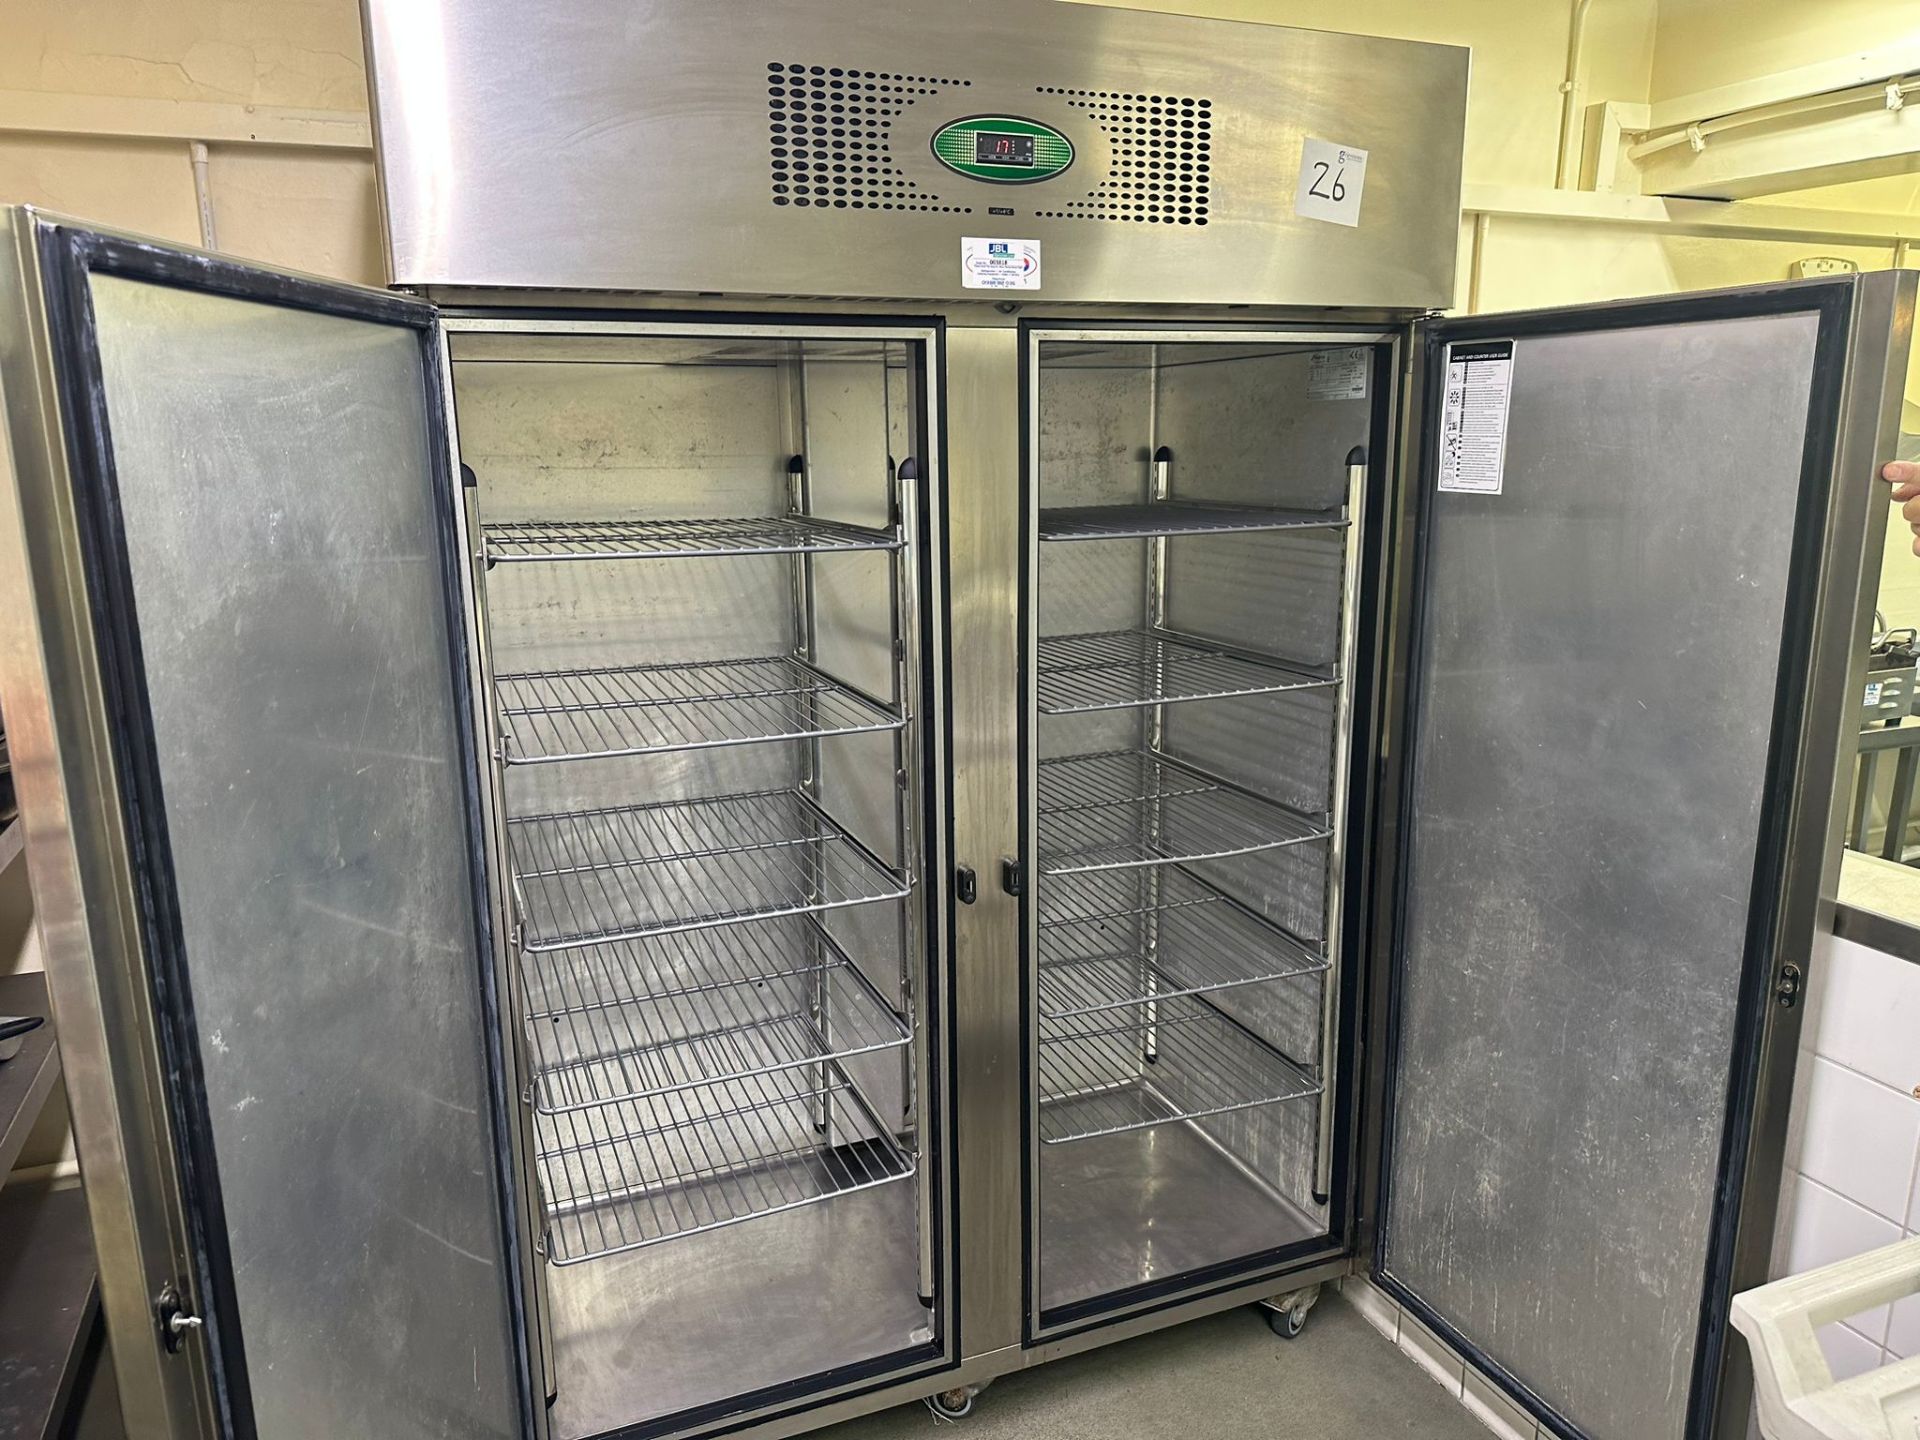 FOSTER Proffessional Double Fridge 1430 W x 1920 H - Image 2 of 3